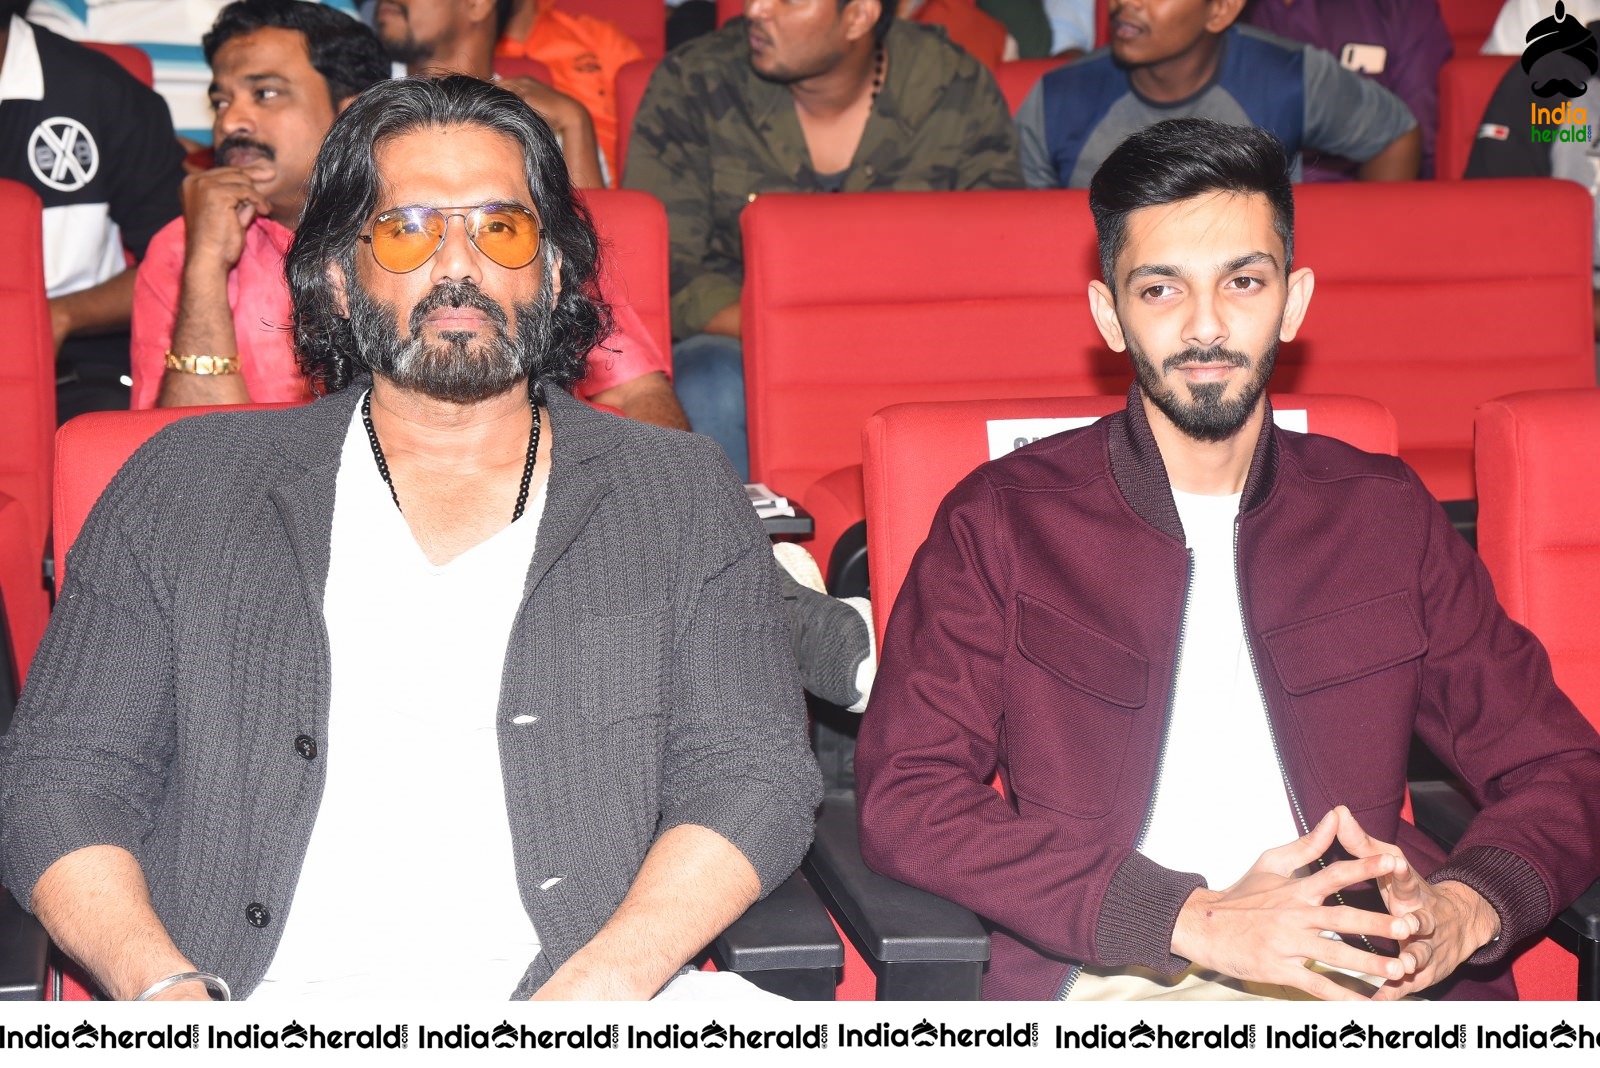 Actor Sunil Shetty and Music Composer Anirudh spotted together